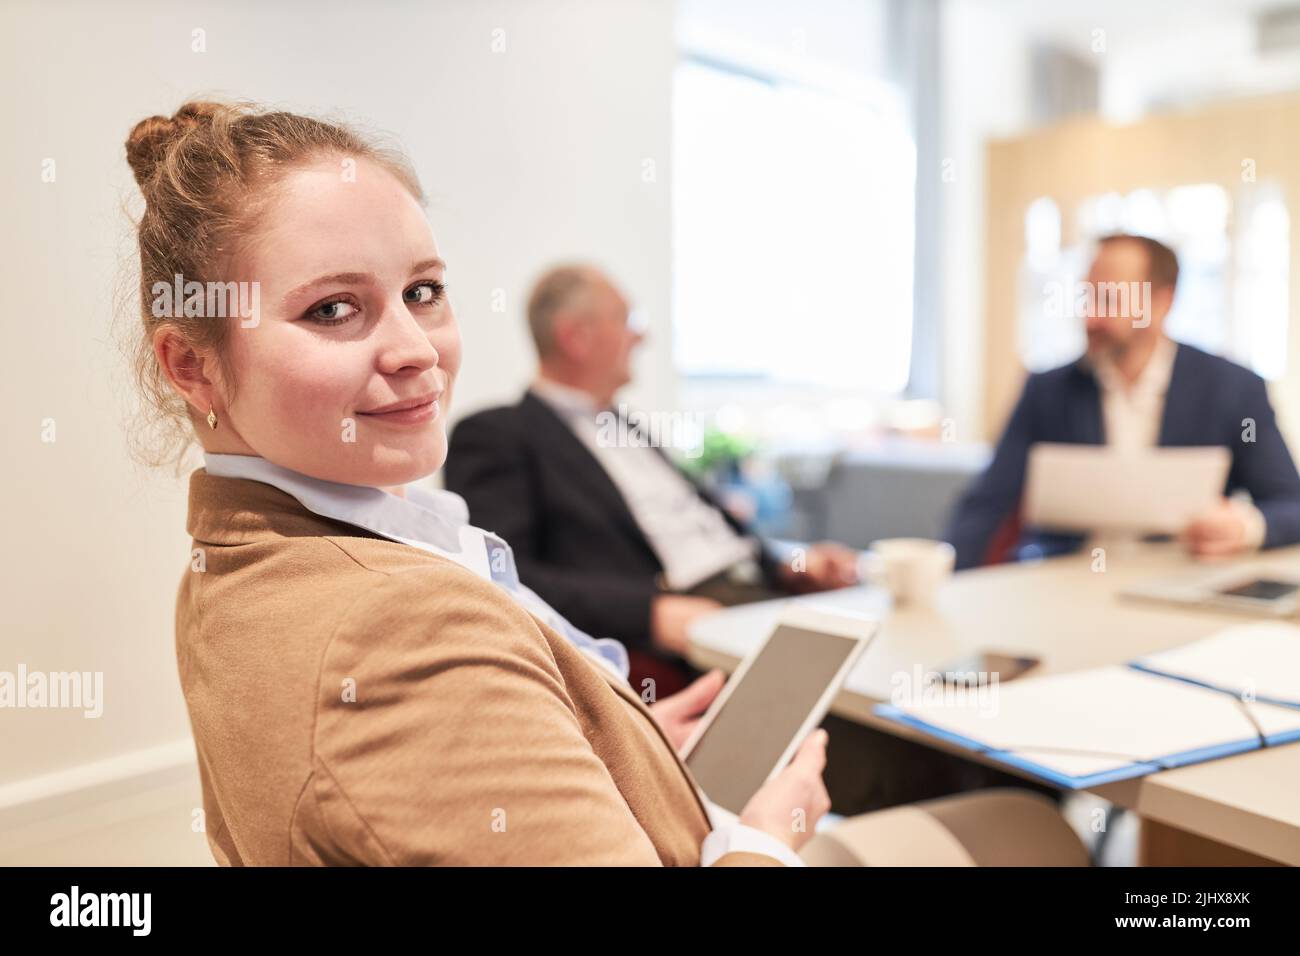 Young business woman as a start-up founder with tablet computer at the conference table in the office Stock Photo